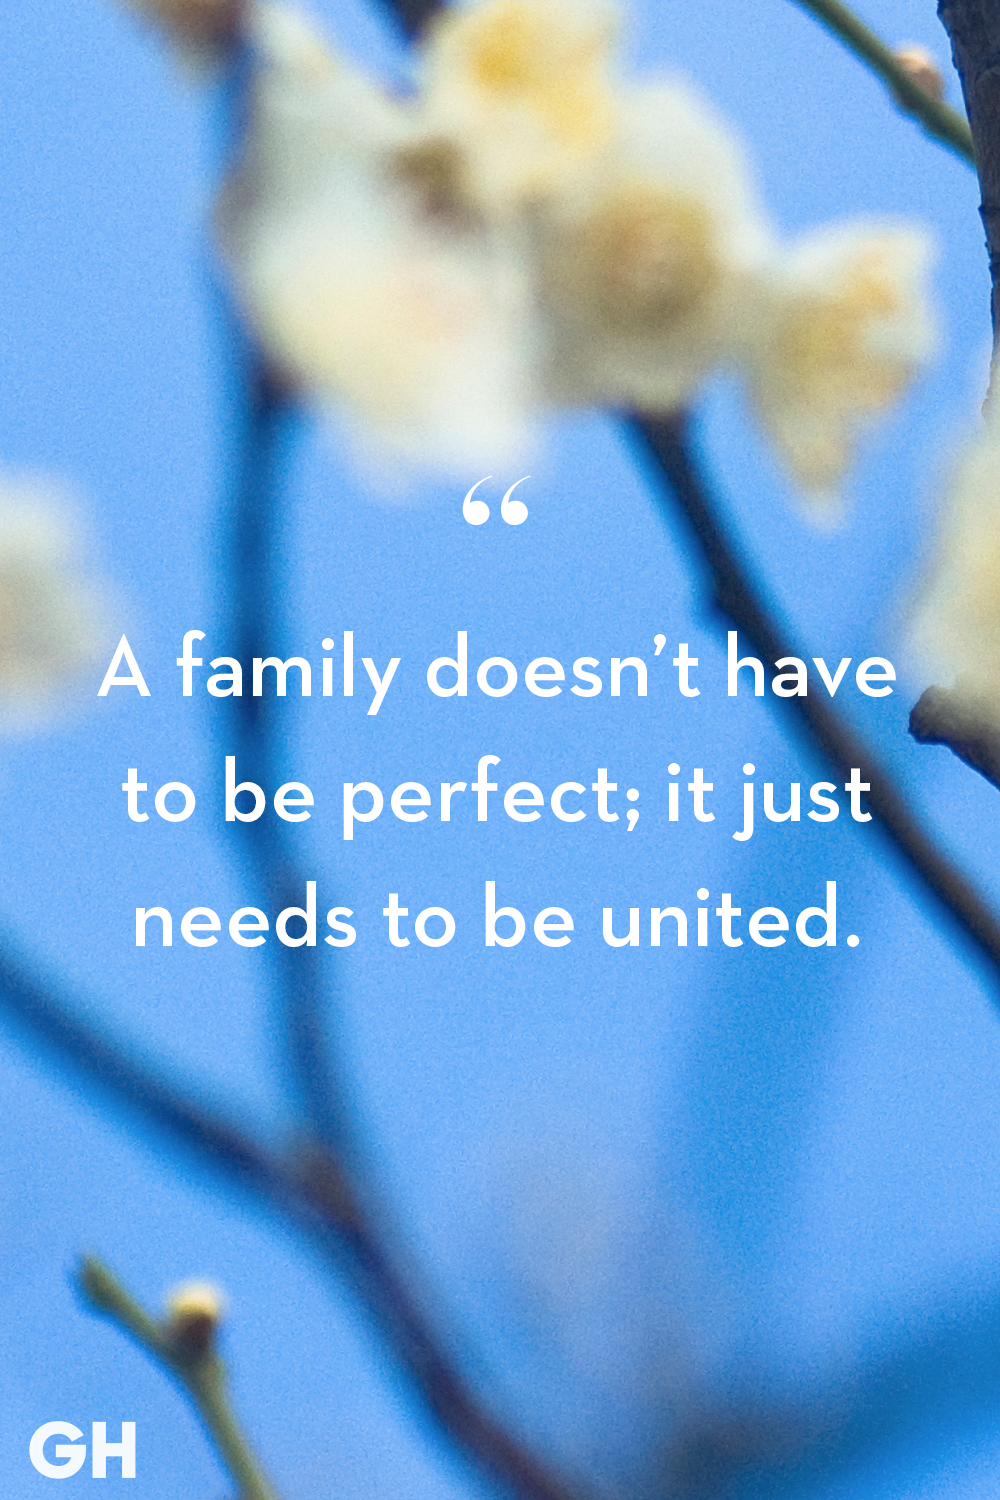 45 Family Quotes Short Quotes About The Importance Of Family